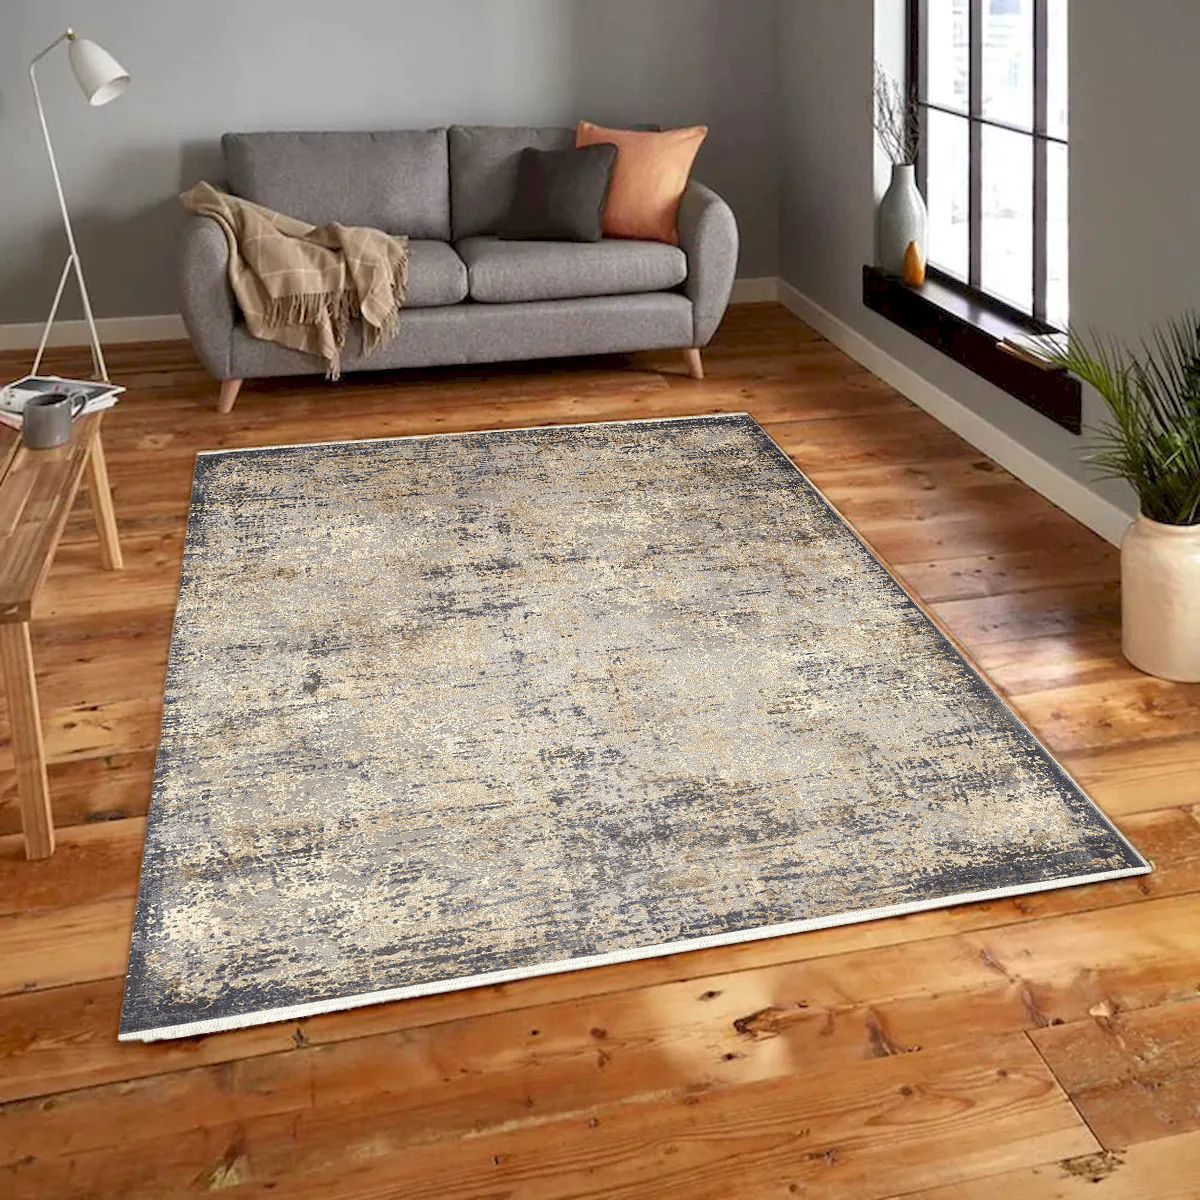 Picture of Mr. MJs Trading VA-CHA-46-1001 4 x 6 ft. Charisma Muted Grey & Ivory Distressed Abstract Rectangle Area Rug